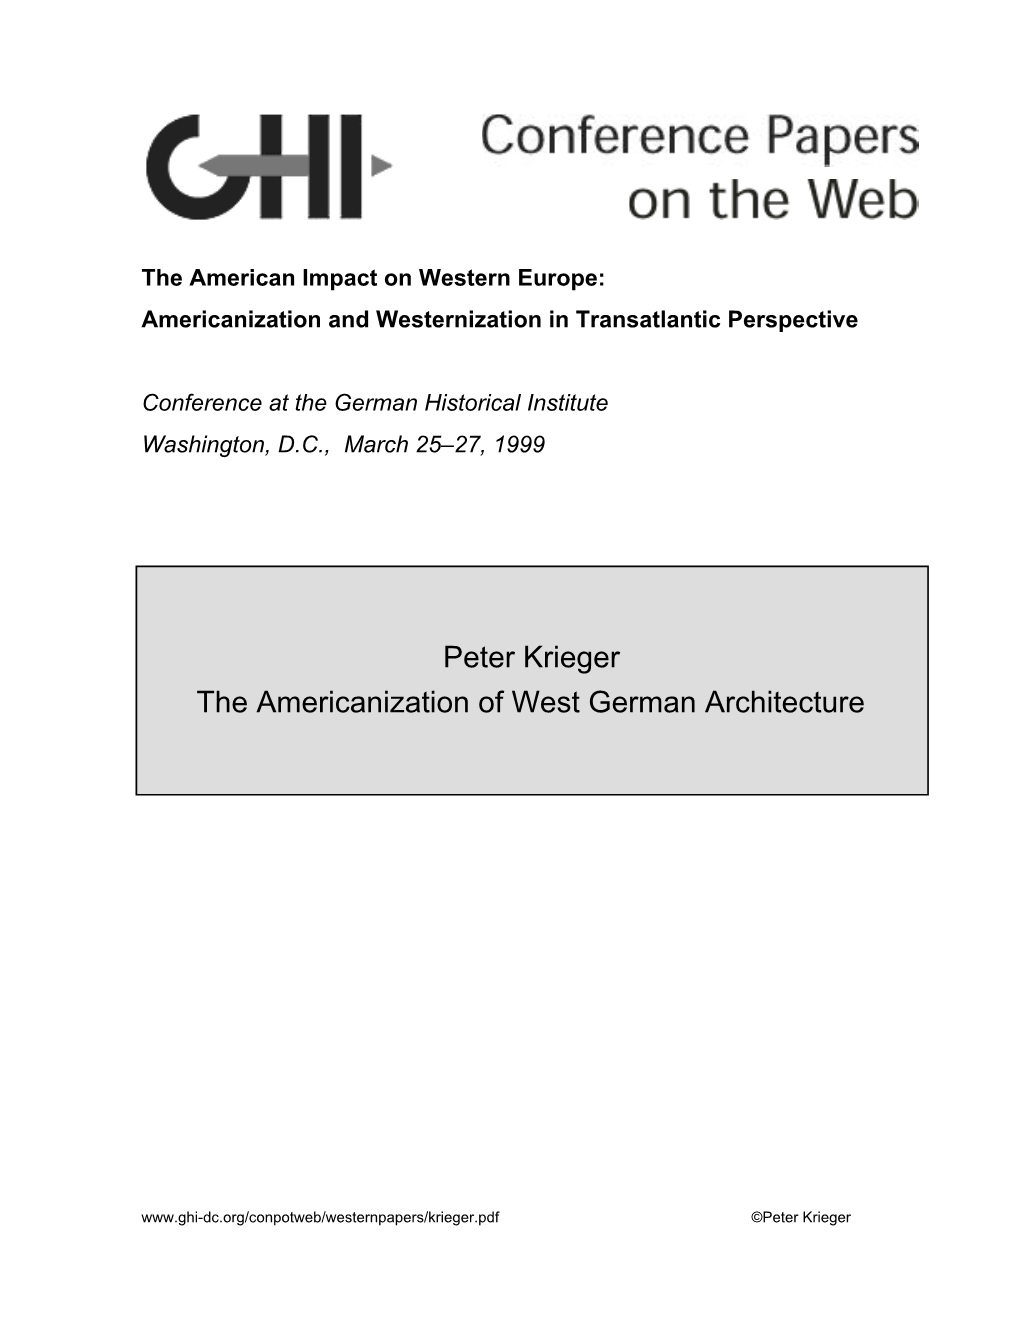 Peter Krieger the Americanization of West German Architecture